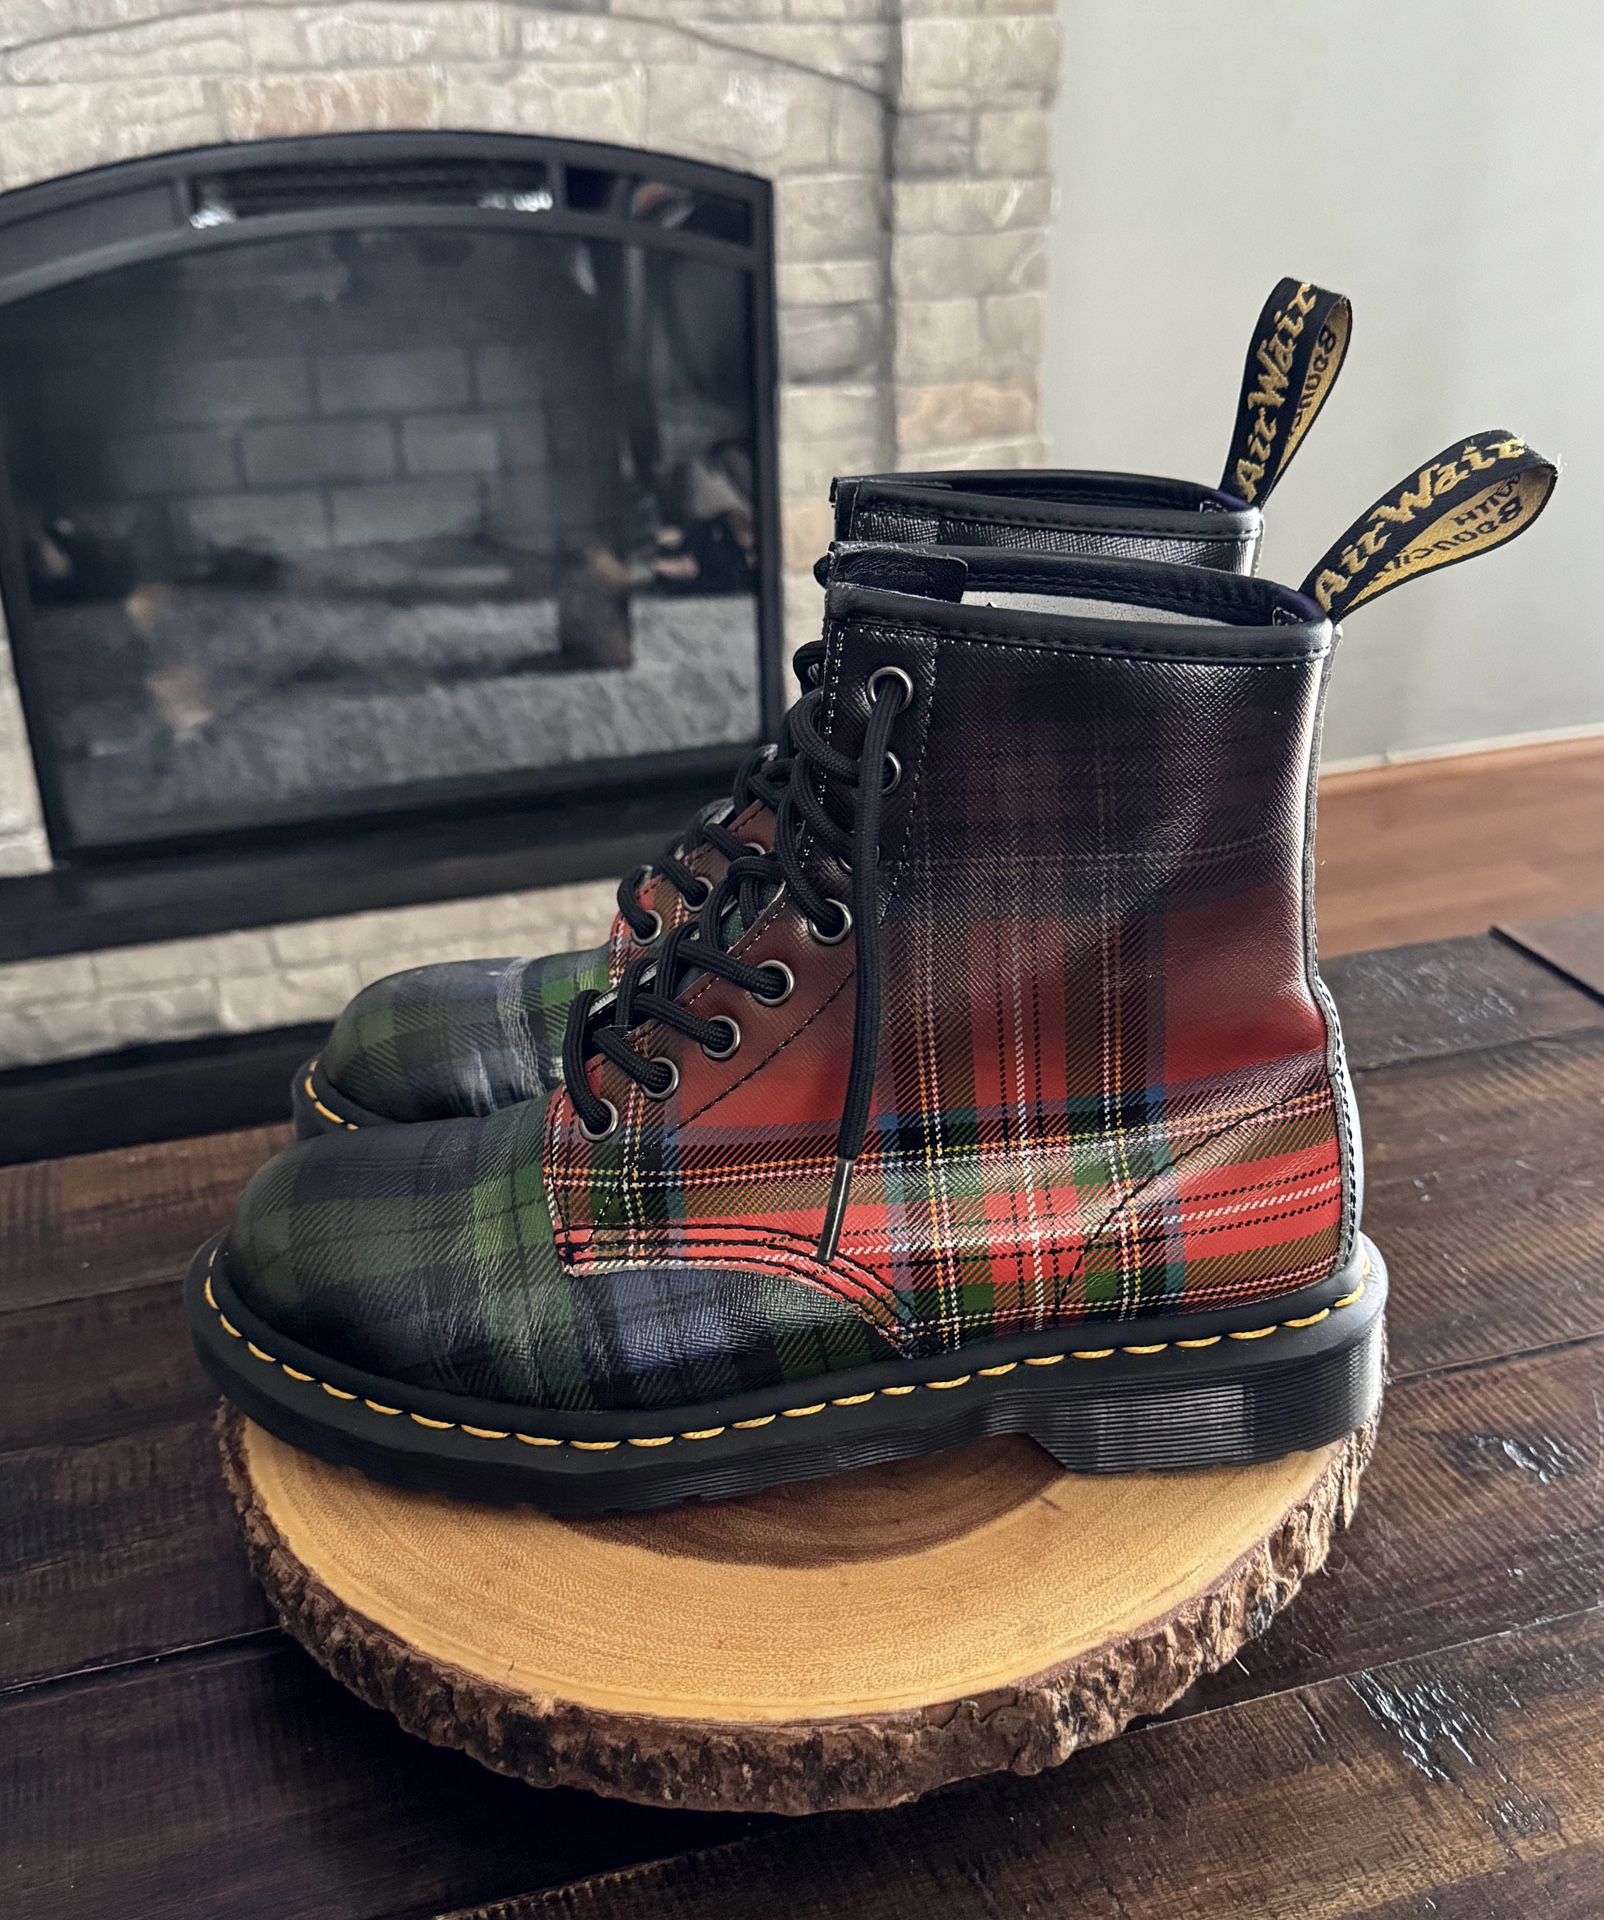 Women’s Dr. Martens 1460 Tartan plaid boots. Size 8. Retail $180. Rare lace up boots in great shape has minor signs of wear as pictured.